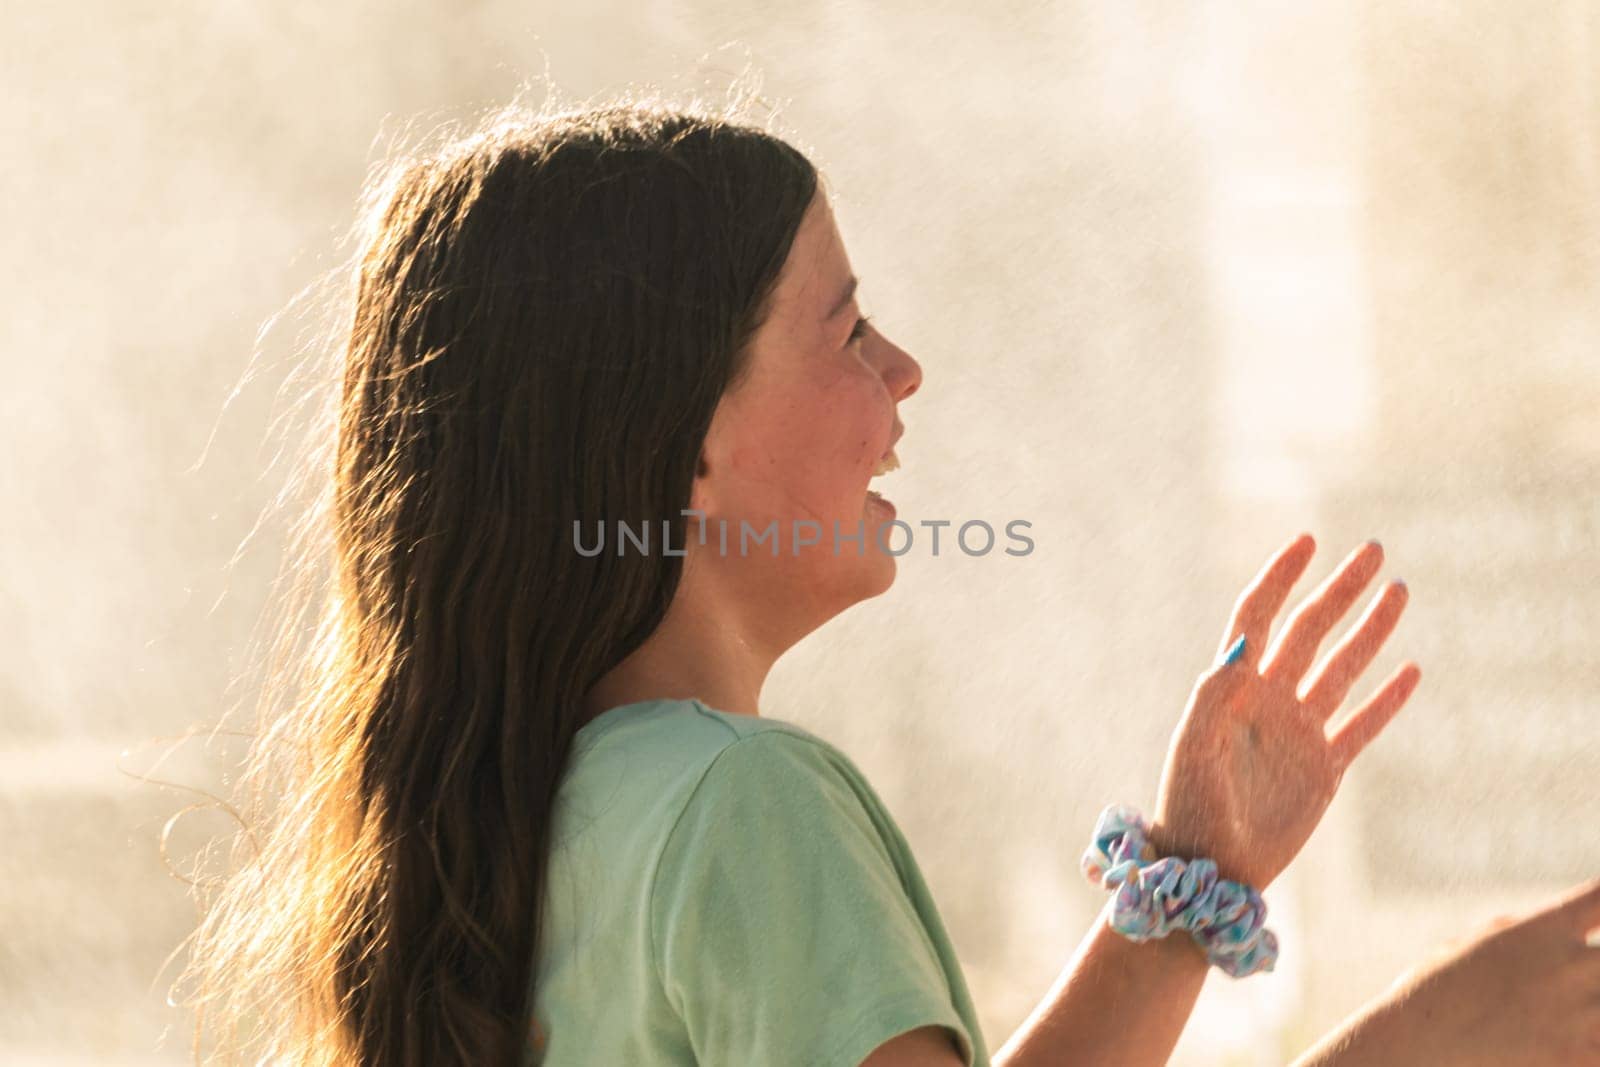 A joyful young girl gleefully gets soaked in refreshing water mist during a hot summer day.